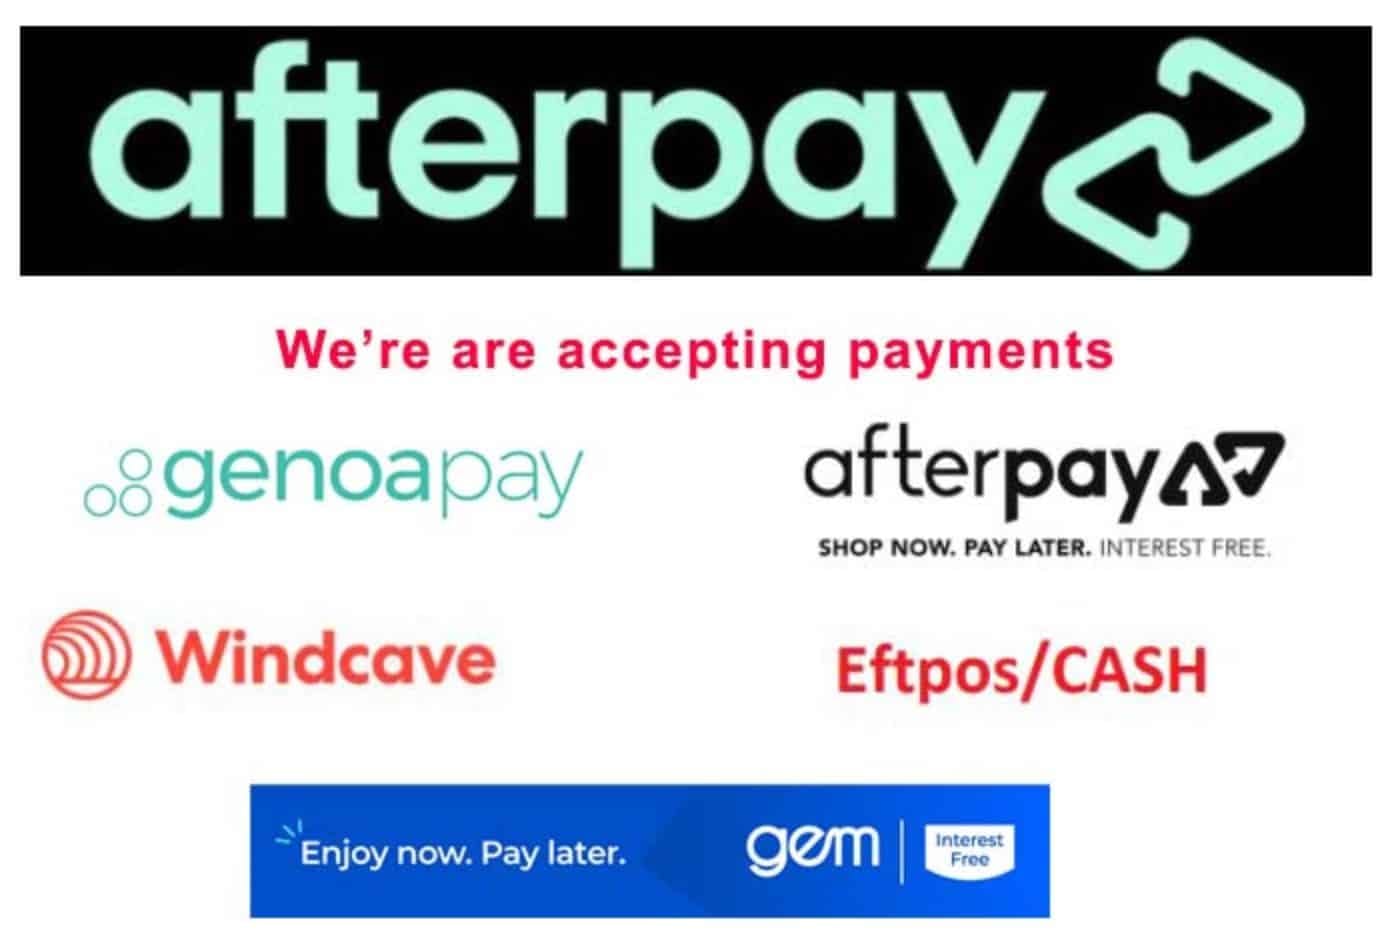 We accept afterpay⭐️ Afterpay is an app that allows you to shop now and pay  later. It's always interest free and easy to use. Visit…